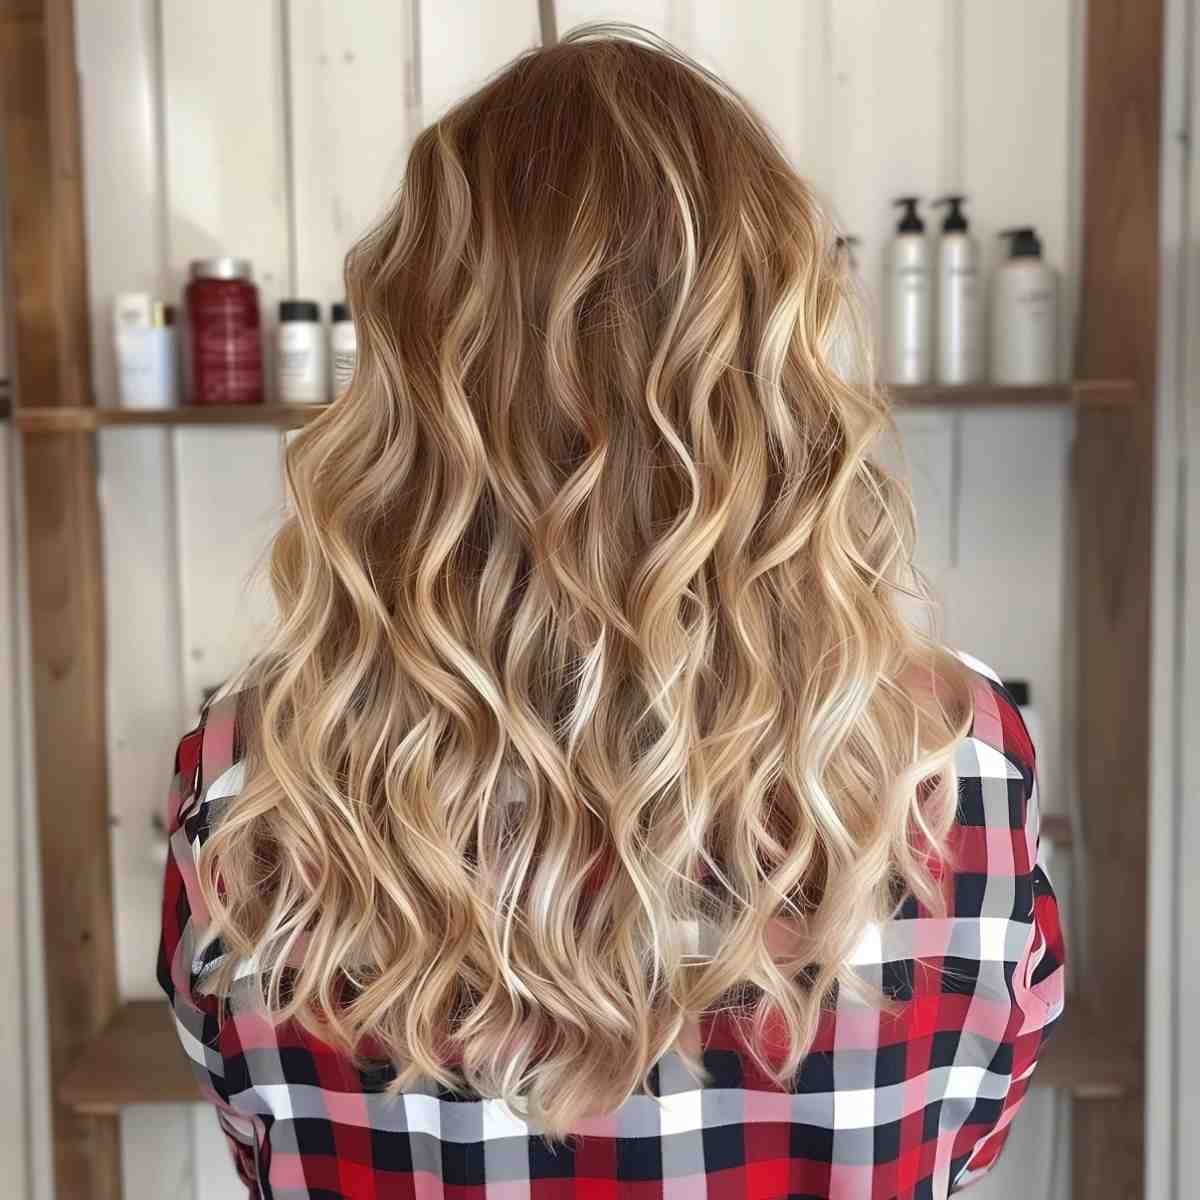 Fine Hair + Blonde Ombre hairstyle